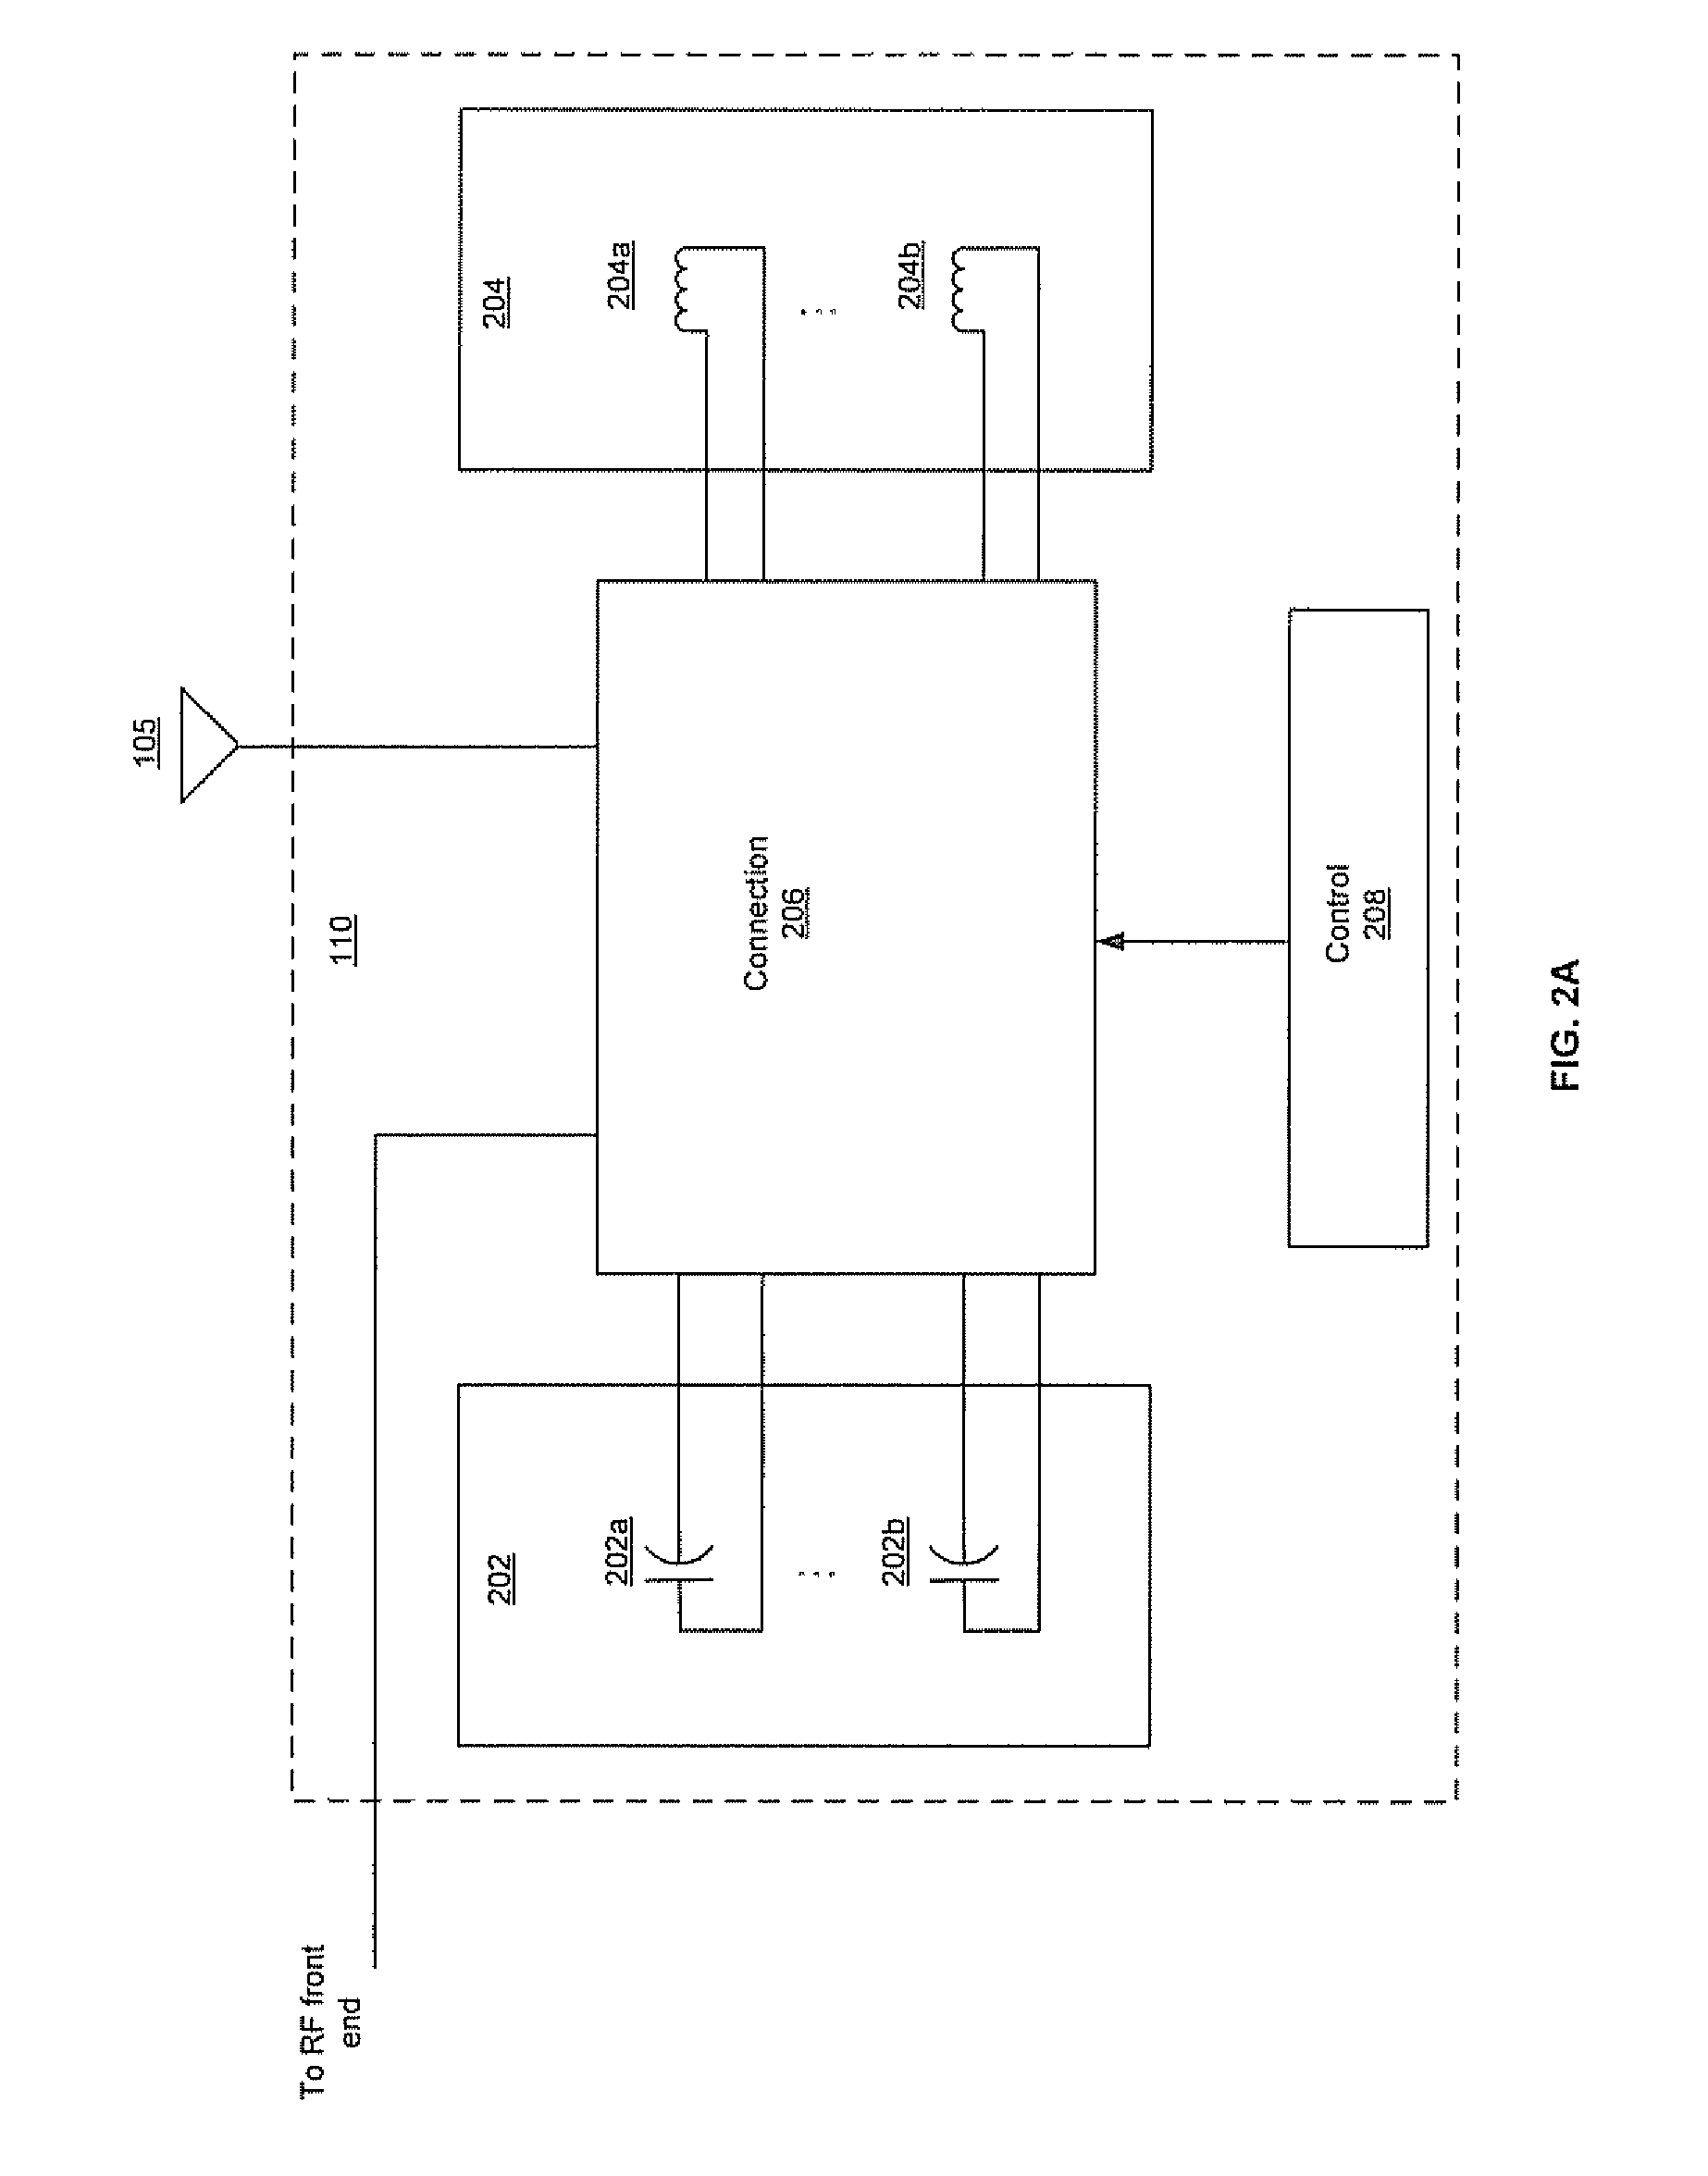 Method and system for dynamically tuning and calibrating an antenna using an on-chip digitally controlled array of capacitors